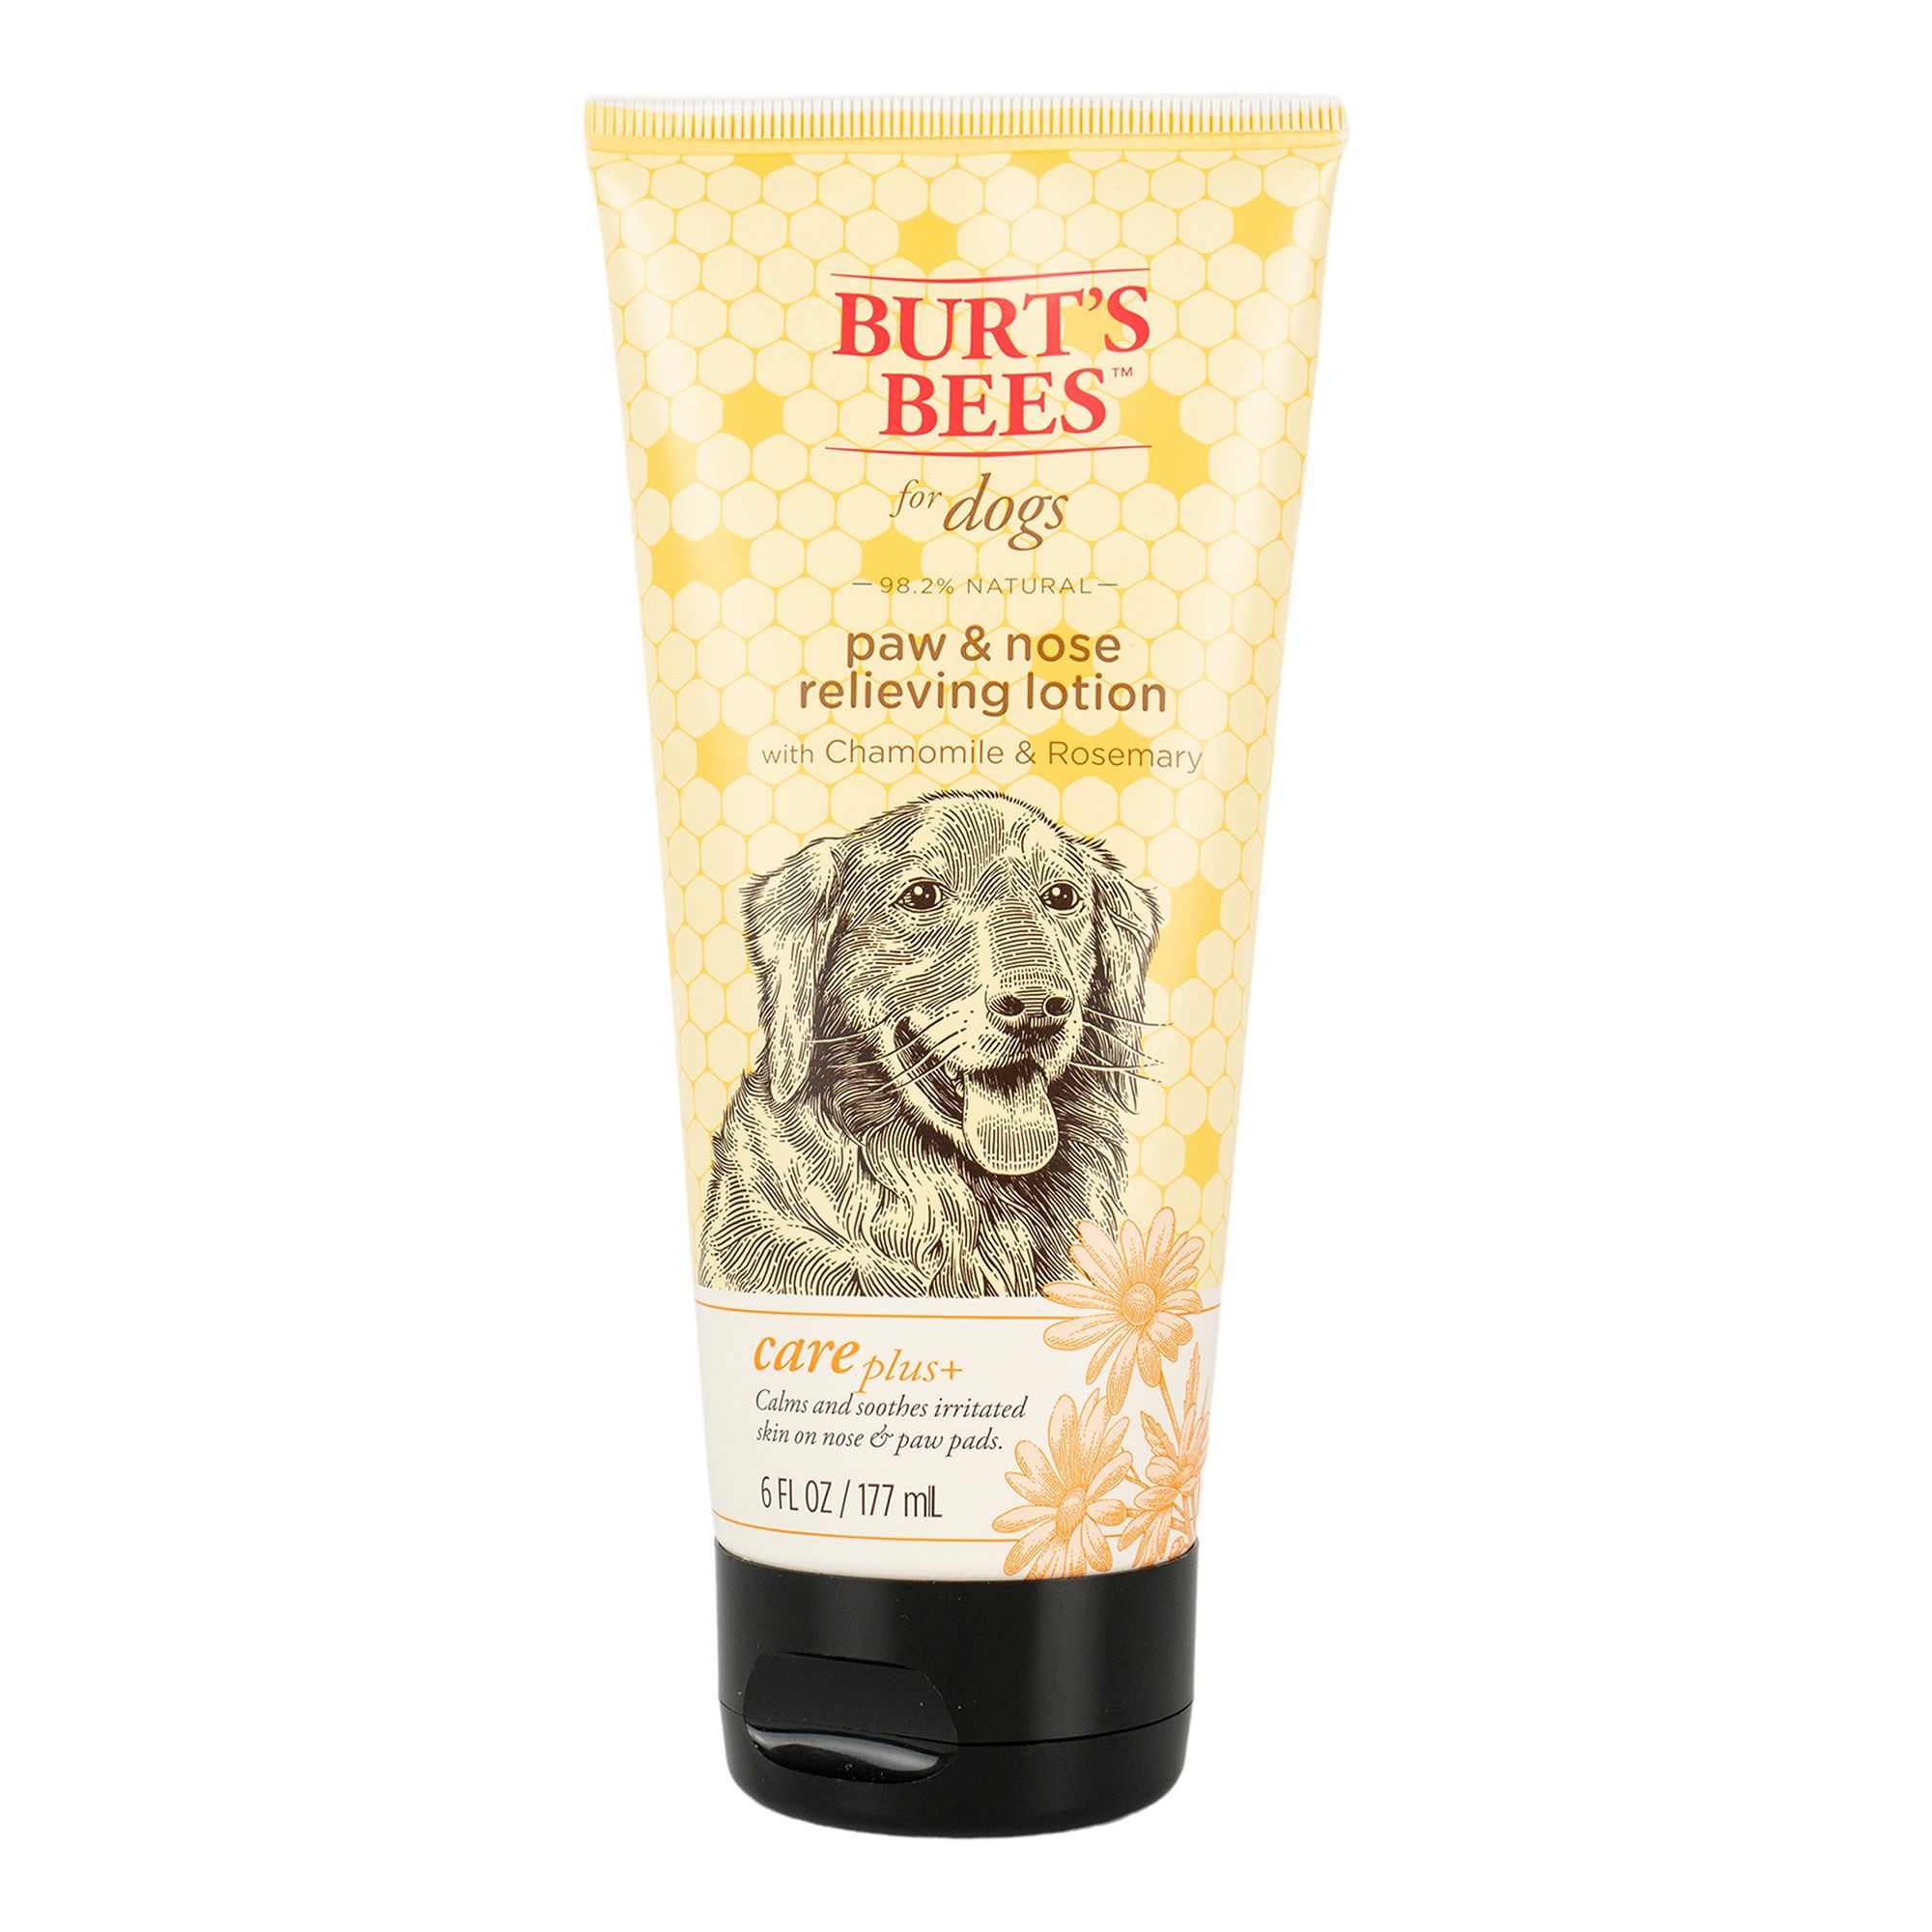 burt's bees dog paw and nose lotion